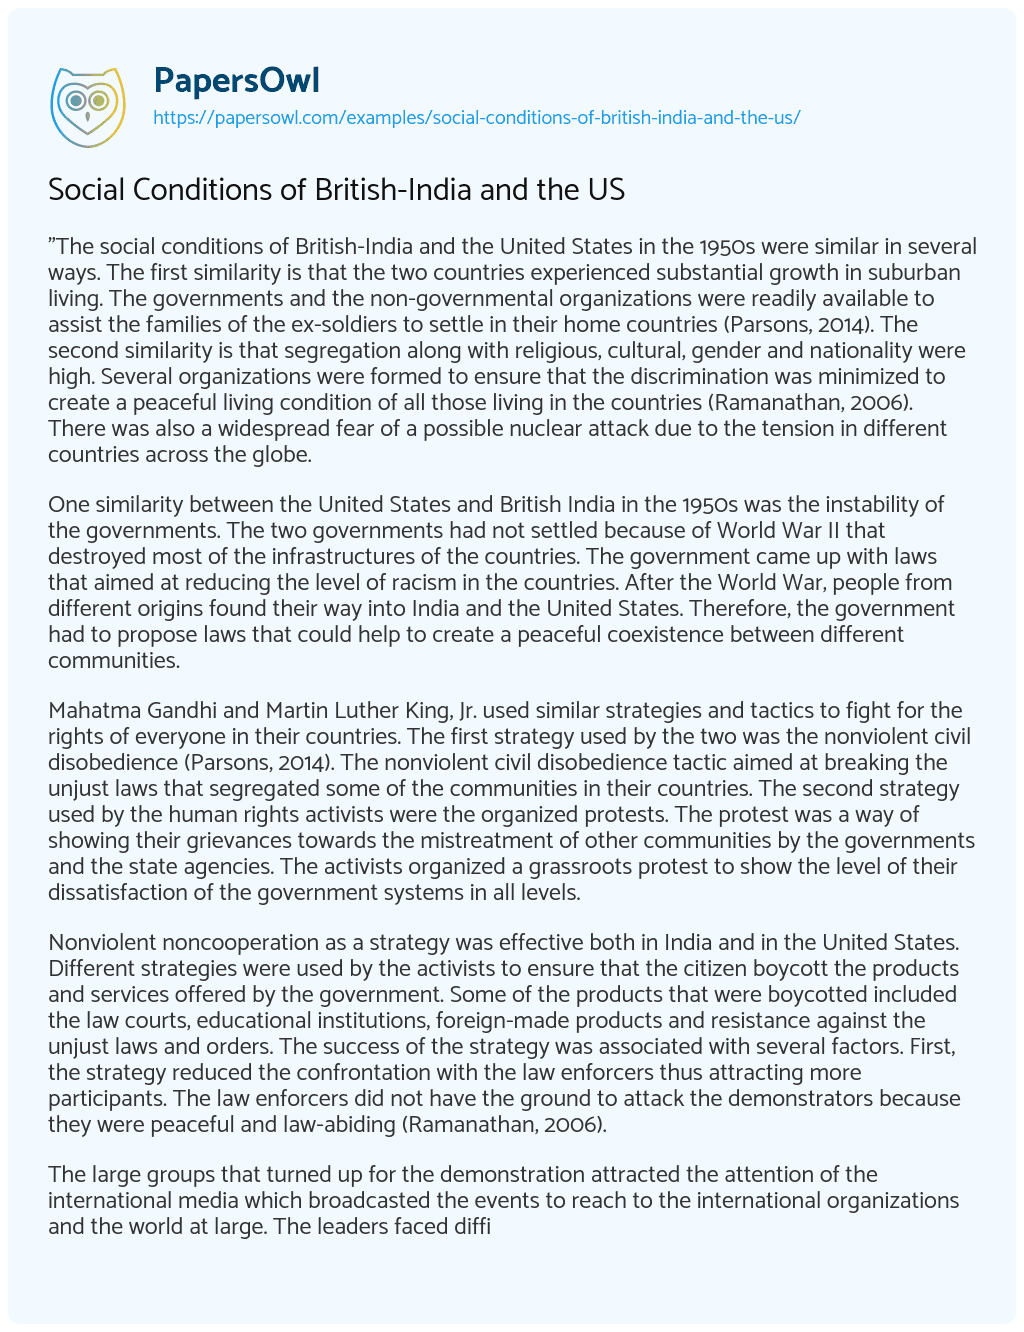 Social Conditions of British-India and the US essay